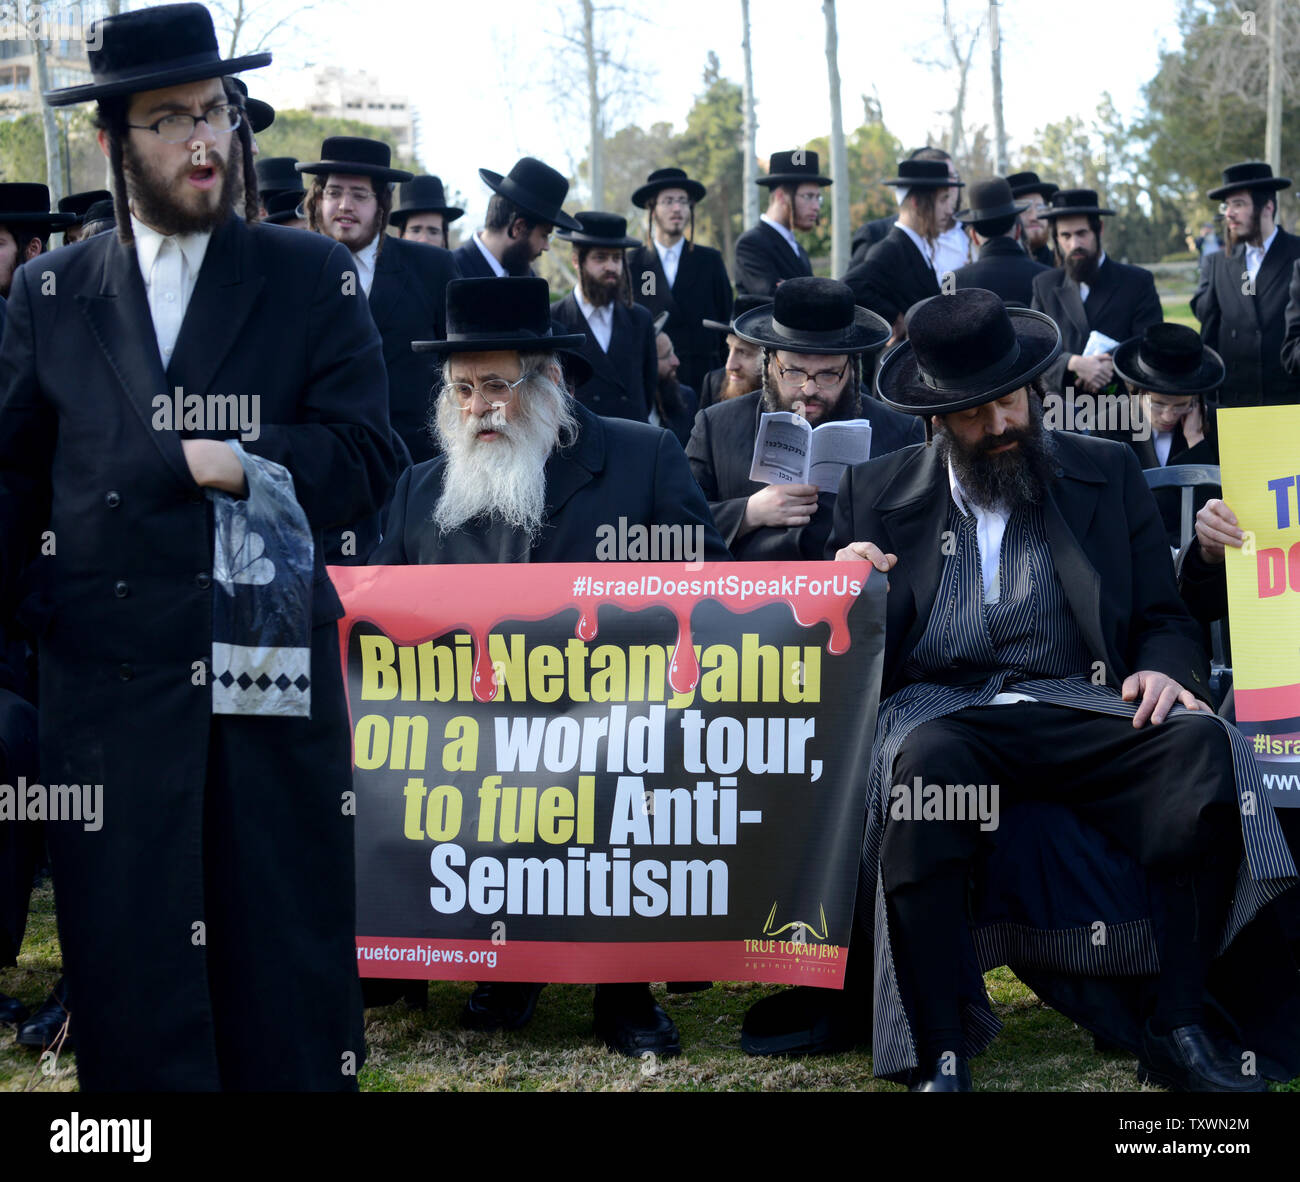 Ultra-Orthodox Jews from the Neturei Karta group hold a protest sign reading 'Bibi Netanyahu on a world tour to fuel Anti-Semitism', in front of the American Consulate in Jerusalem, Israel, to condemn today's speech by Israeli Prime Minister Benjamin Netanyahu to the US Congress, March 3, 2015.  Photo by Debbie Hill/UPI Stock Photo